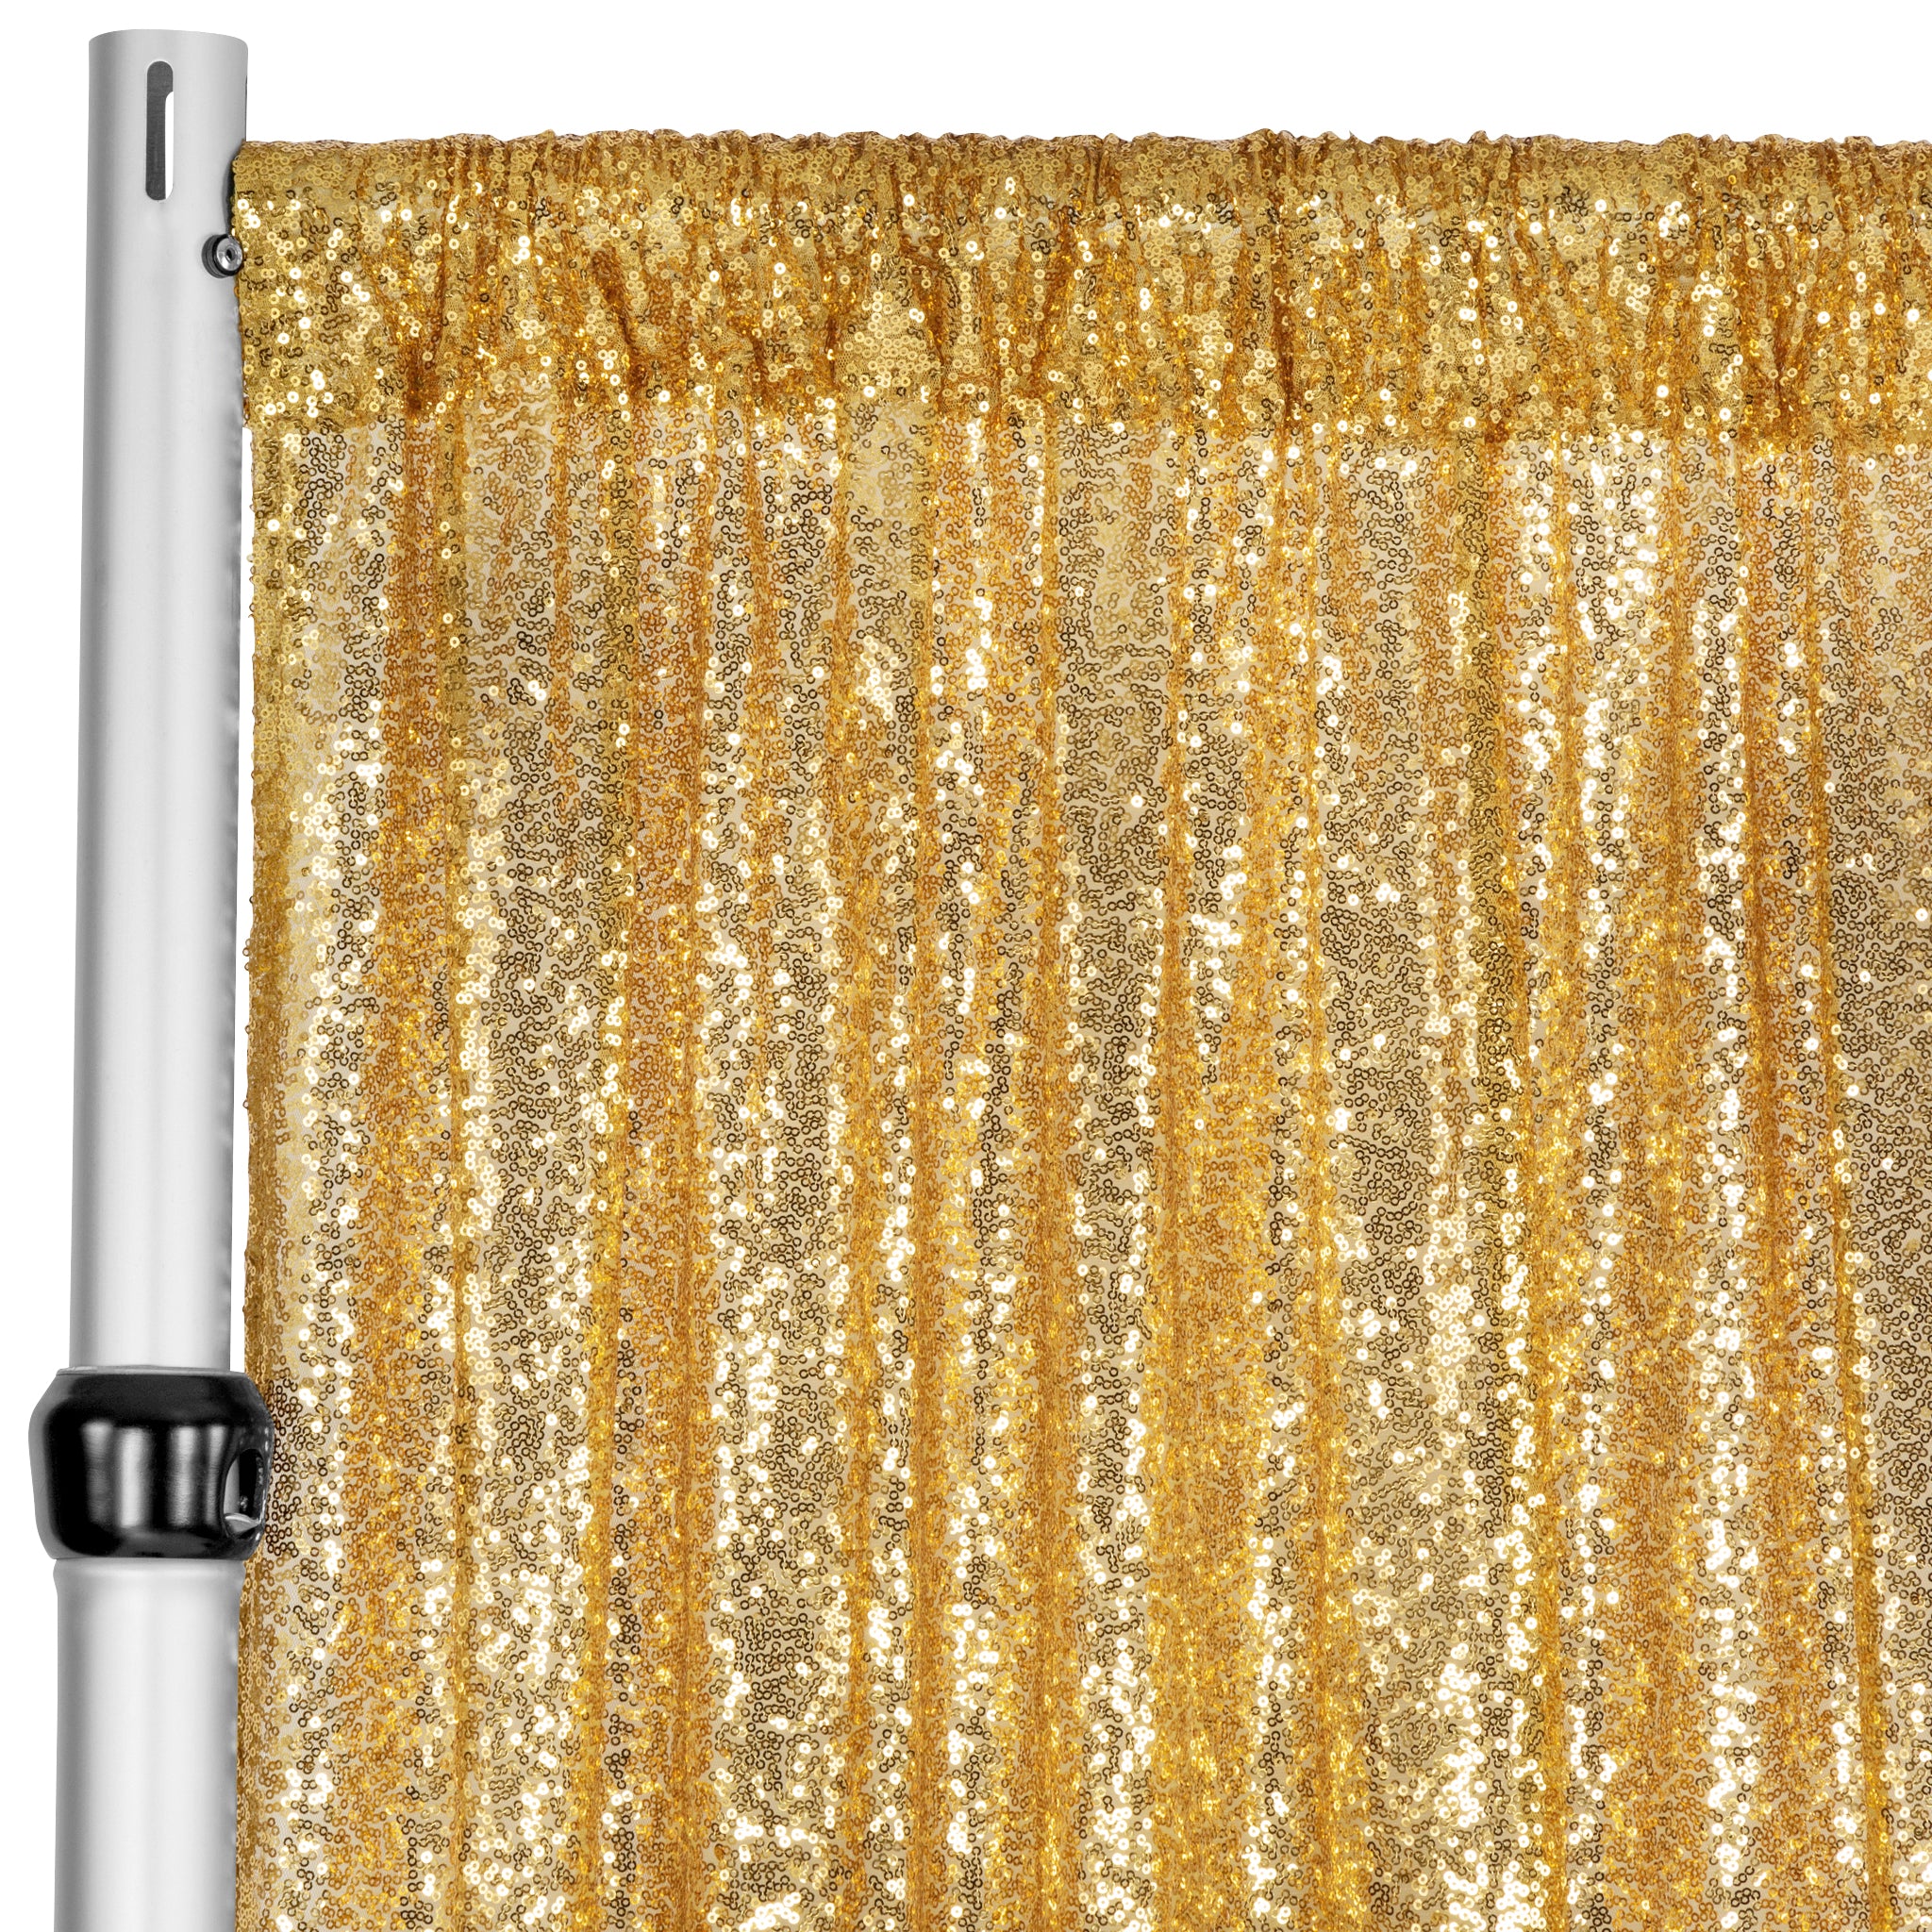 Hot Pink Sequin Curtain 4ft x 8ft Glittery Backdrop for Photography Great  Gatsby Decorations Party